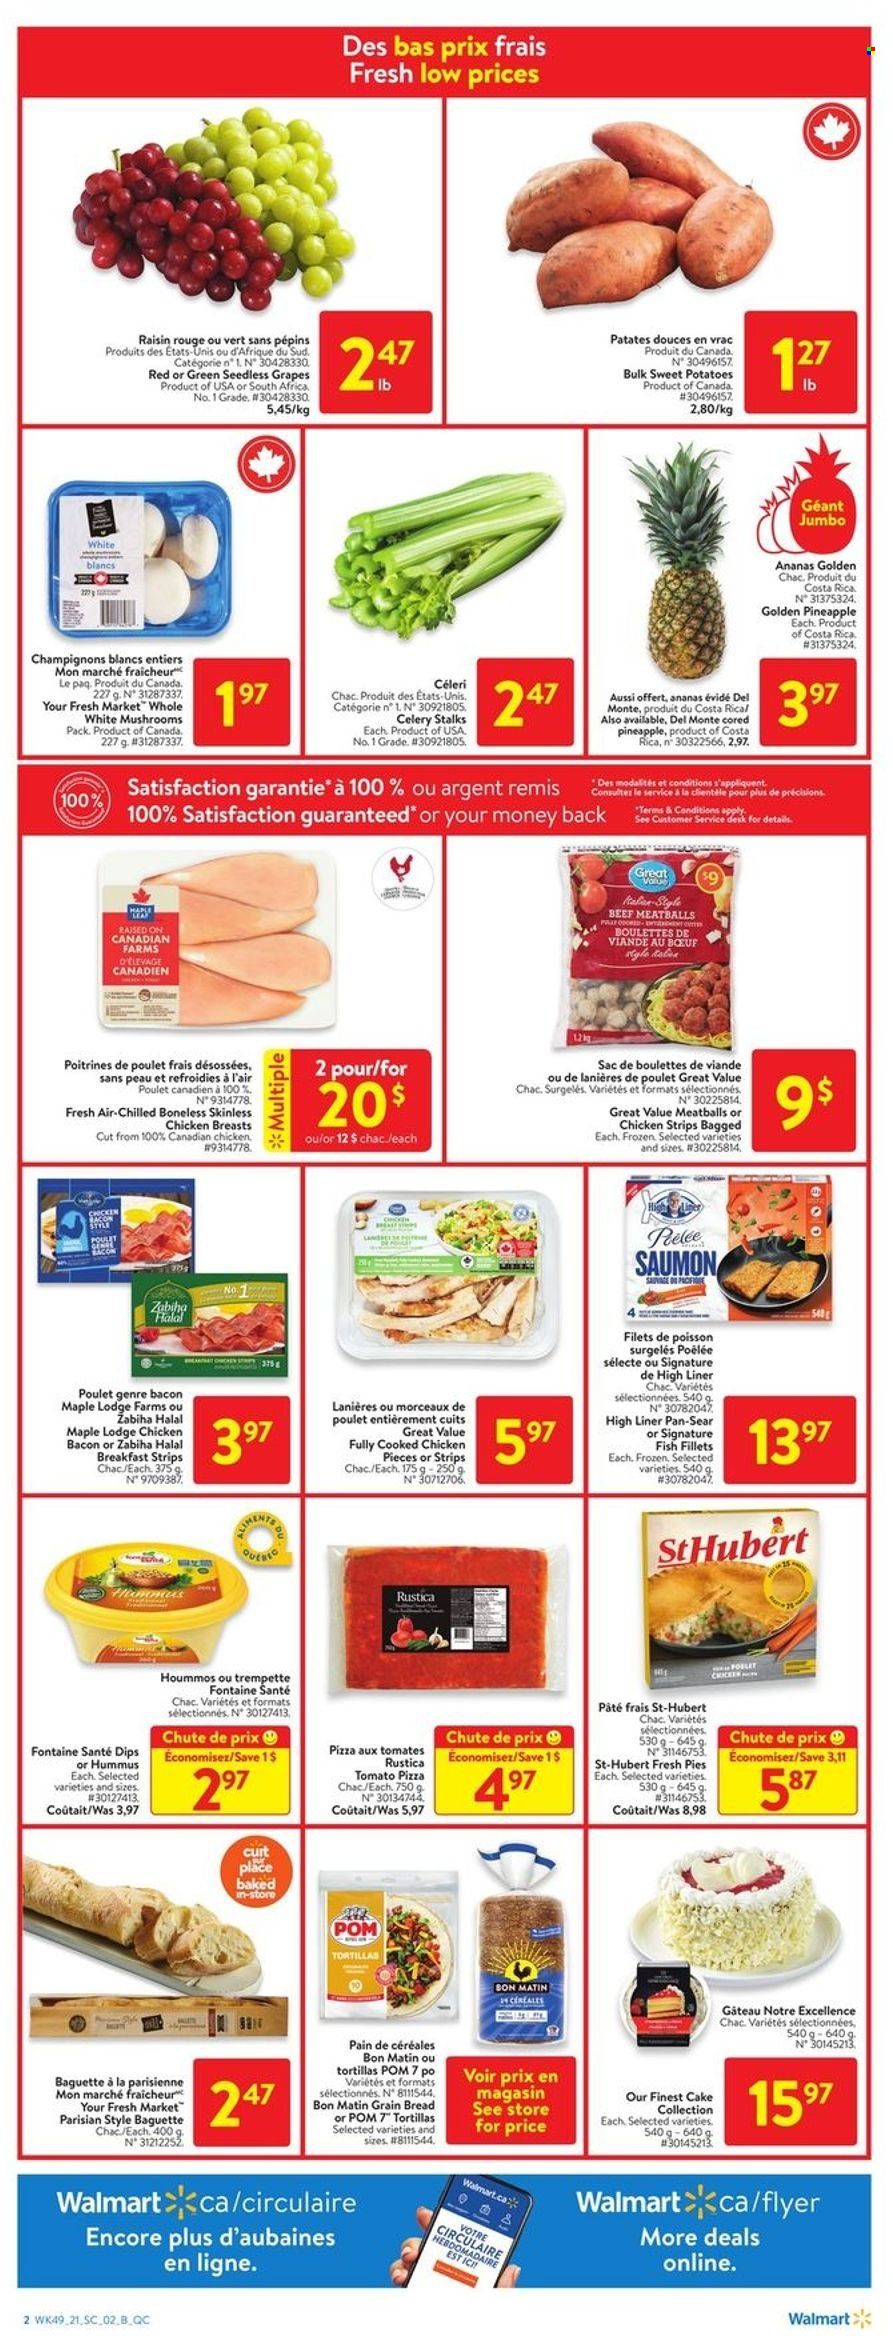 thumbnail - Walmart Flyer - December 30, 2021 - January 05, 2022 - Sales products - bread, tortillas, cake, celery, sweet potato, potatoes, sleeved celery, grapes, seedless grapes, pineapple, fish fillets, fish, pizza, meatballs, bacon, hummus, strips, chicken strips, chicken breasts, pan, desk, baguette. Page 2.